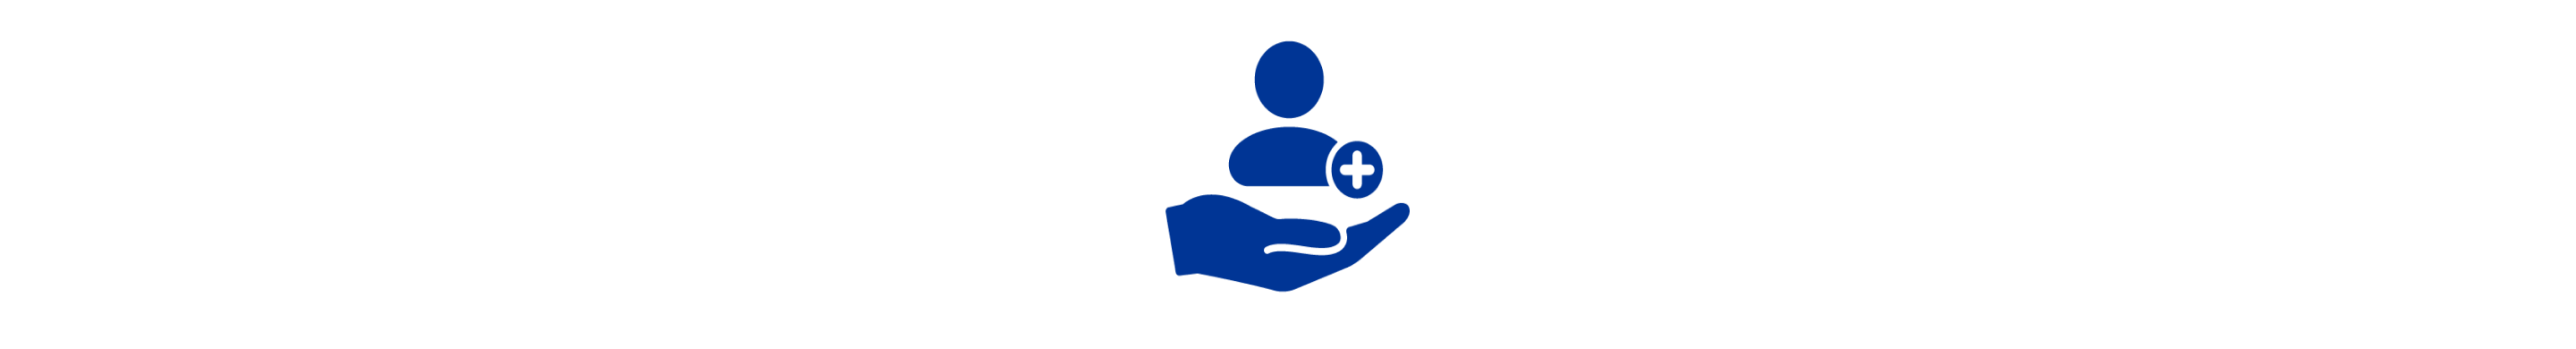 A blue icon of hand holding up a person next to a blue cross